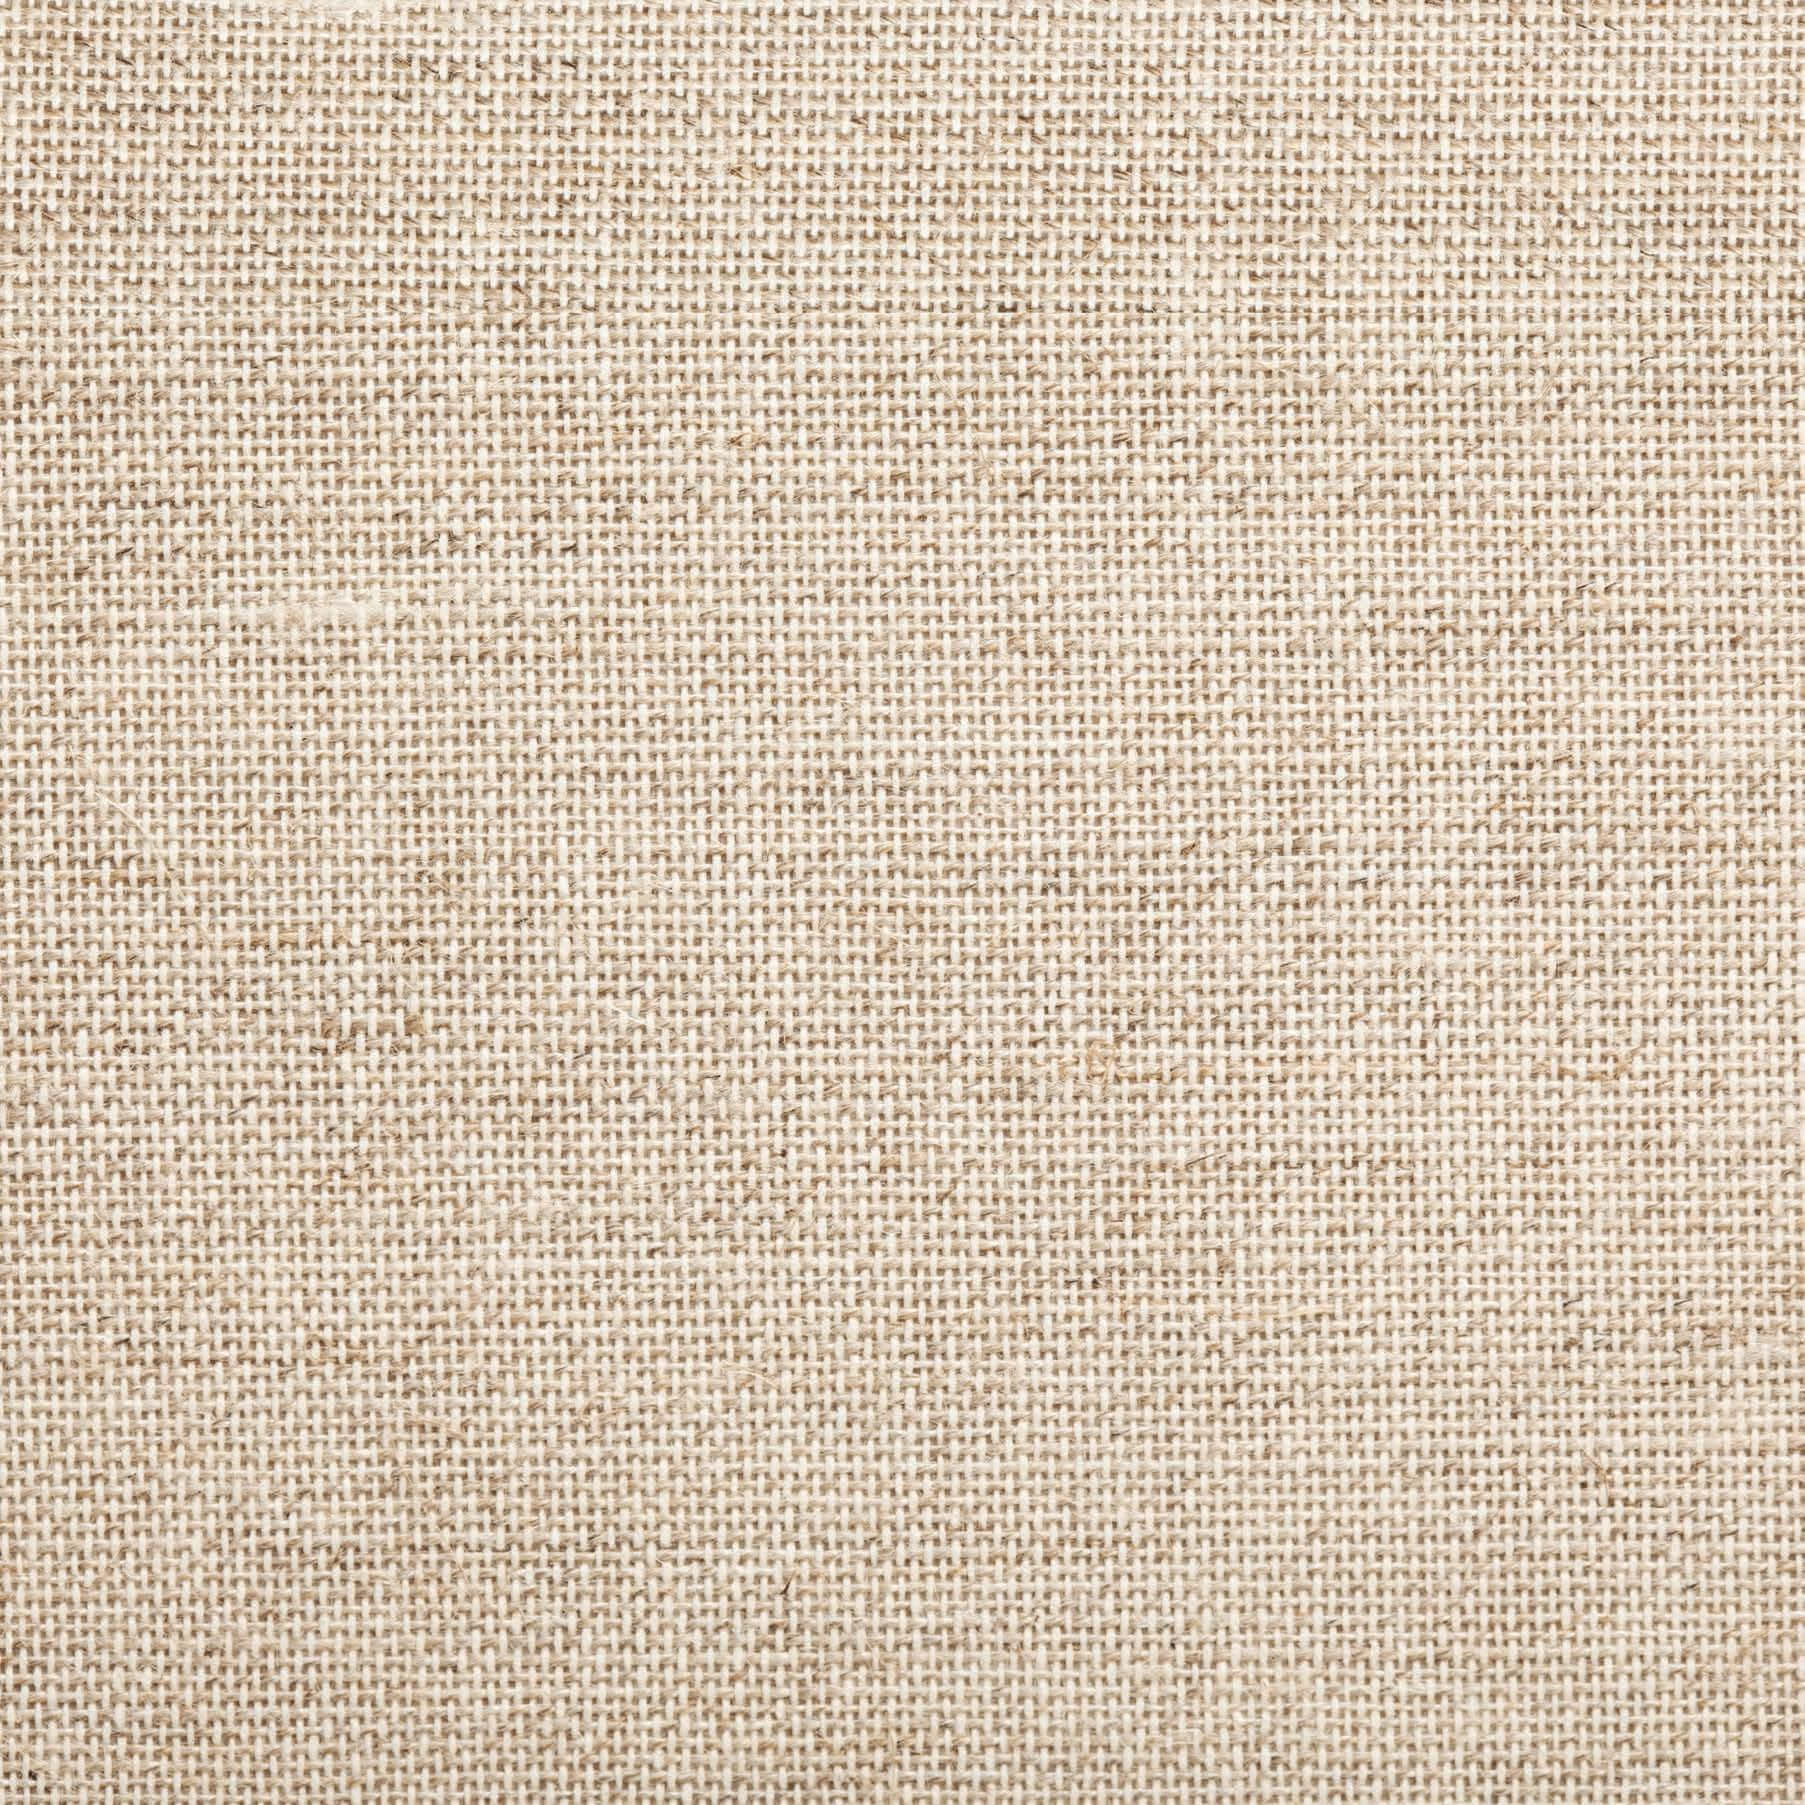 A Warm and Cozy Burlap Background